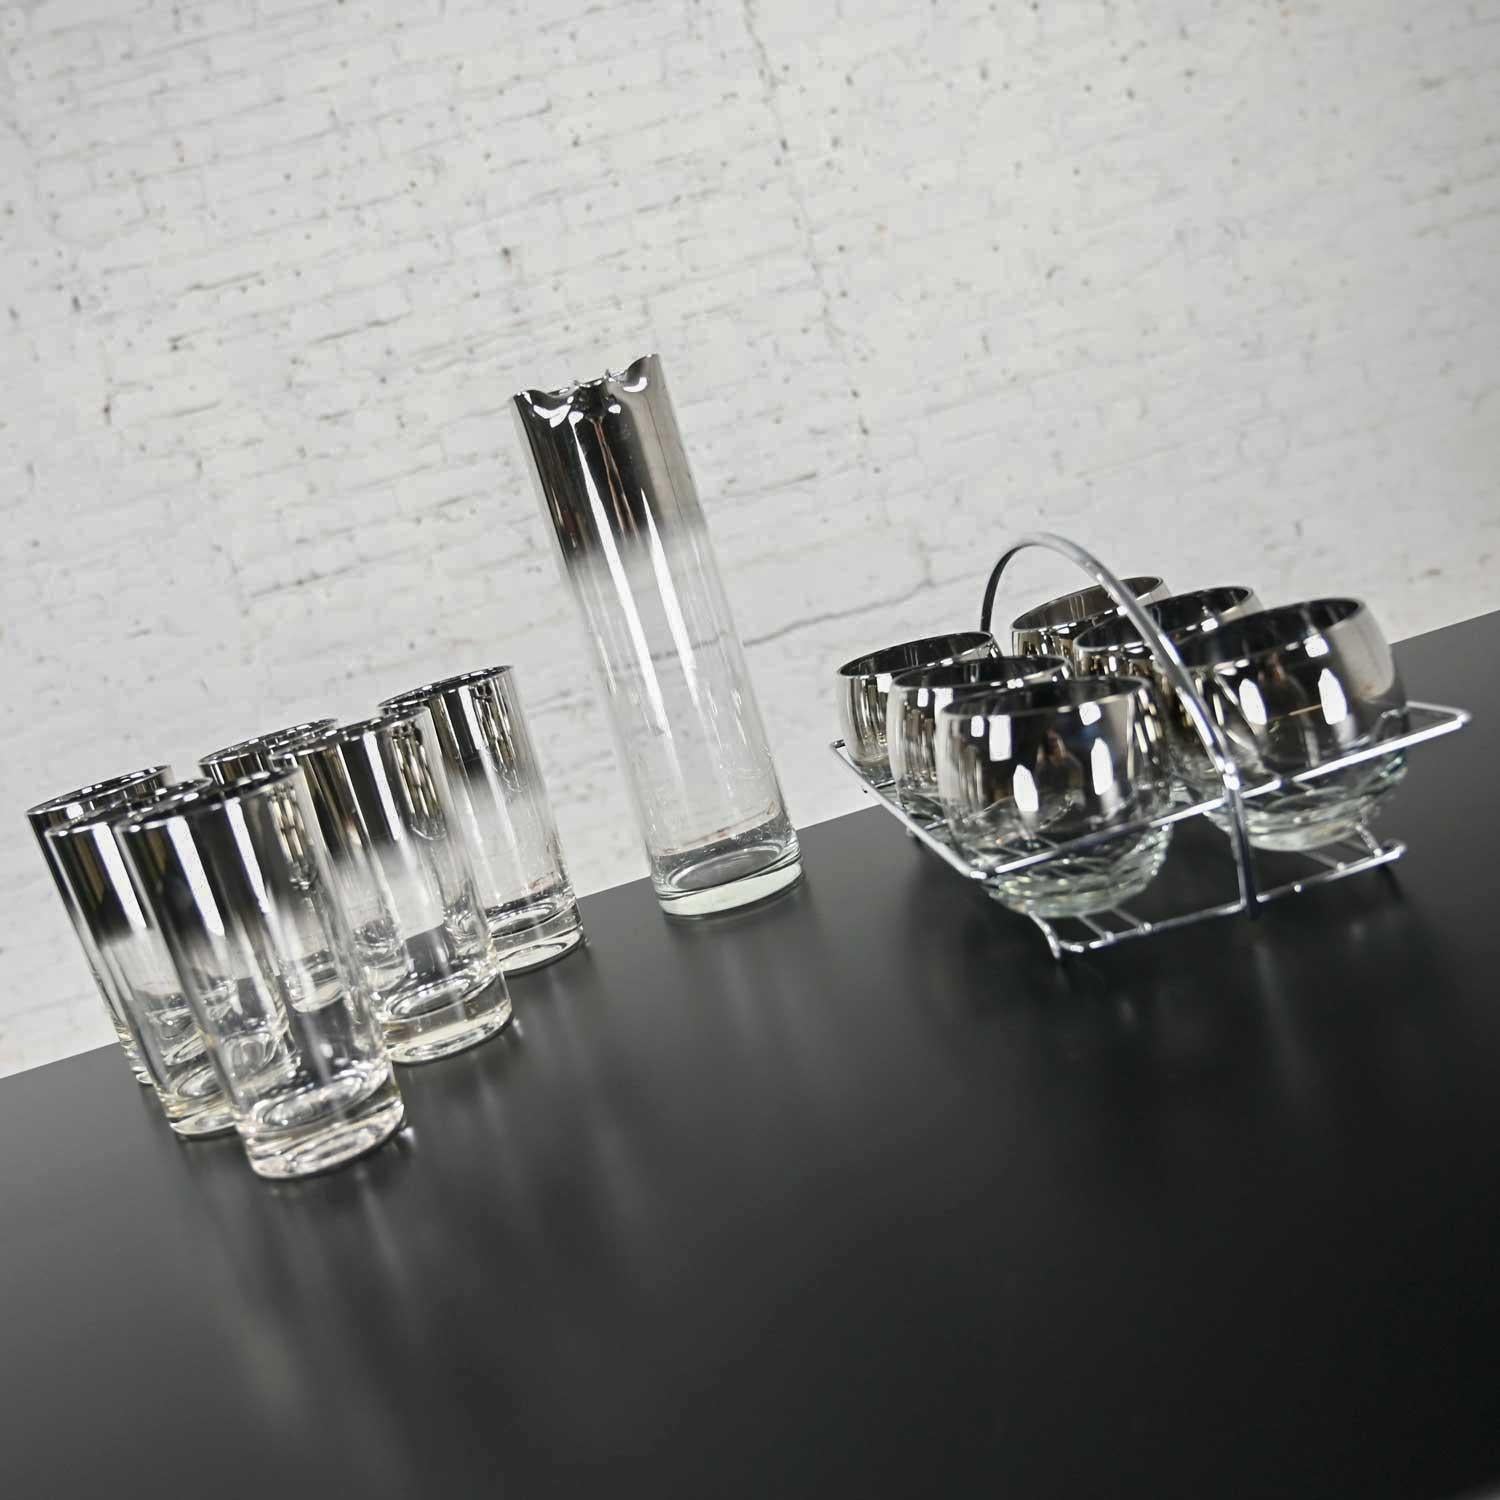 Stunning vintage silver rimmed ombre 14-piece cocktail glassware set attributed to Dorothy Thorpe. The set is comprised of six roly poly glasses in a chrome caddy with handle, 6 Tom Collins glasses, and a handle less cocktail pitcher or carafe.